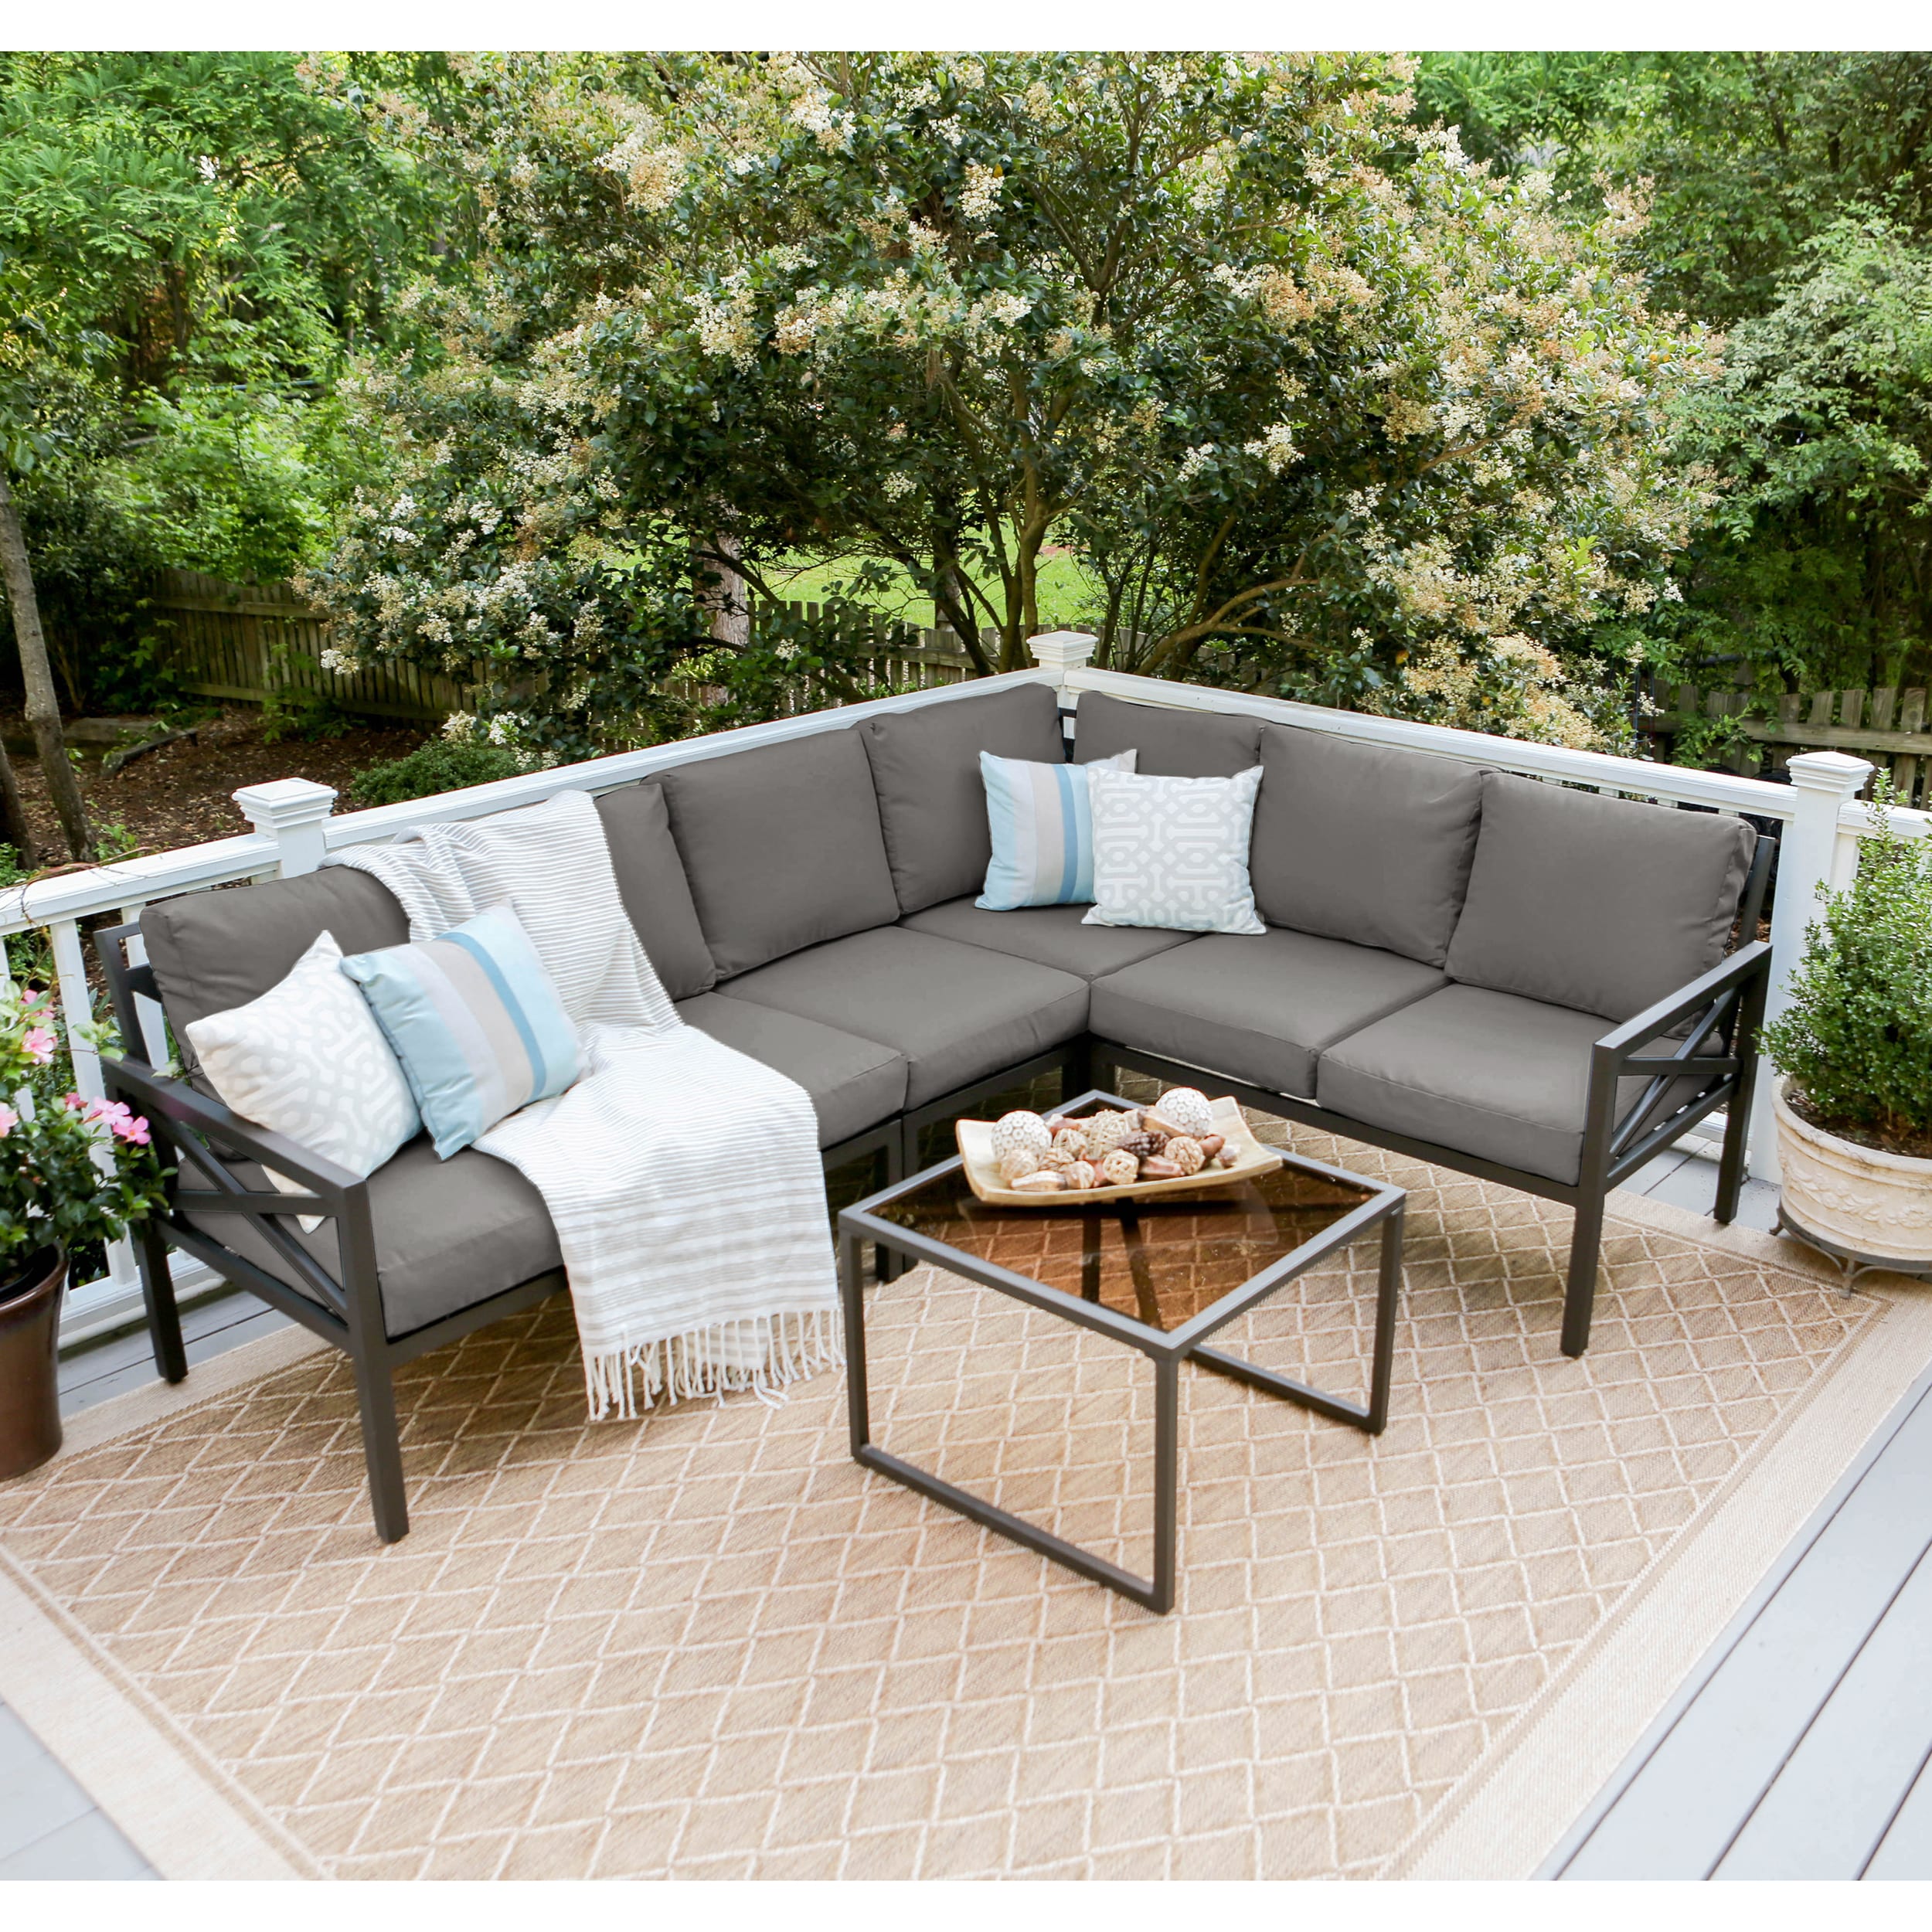 Outdoor Sofa Set With Gray Cushions Aluminum Sectional Furniture Couch Patio 